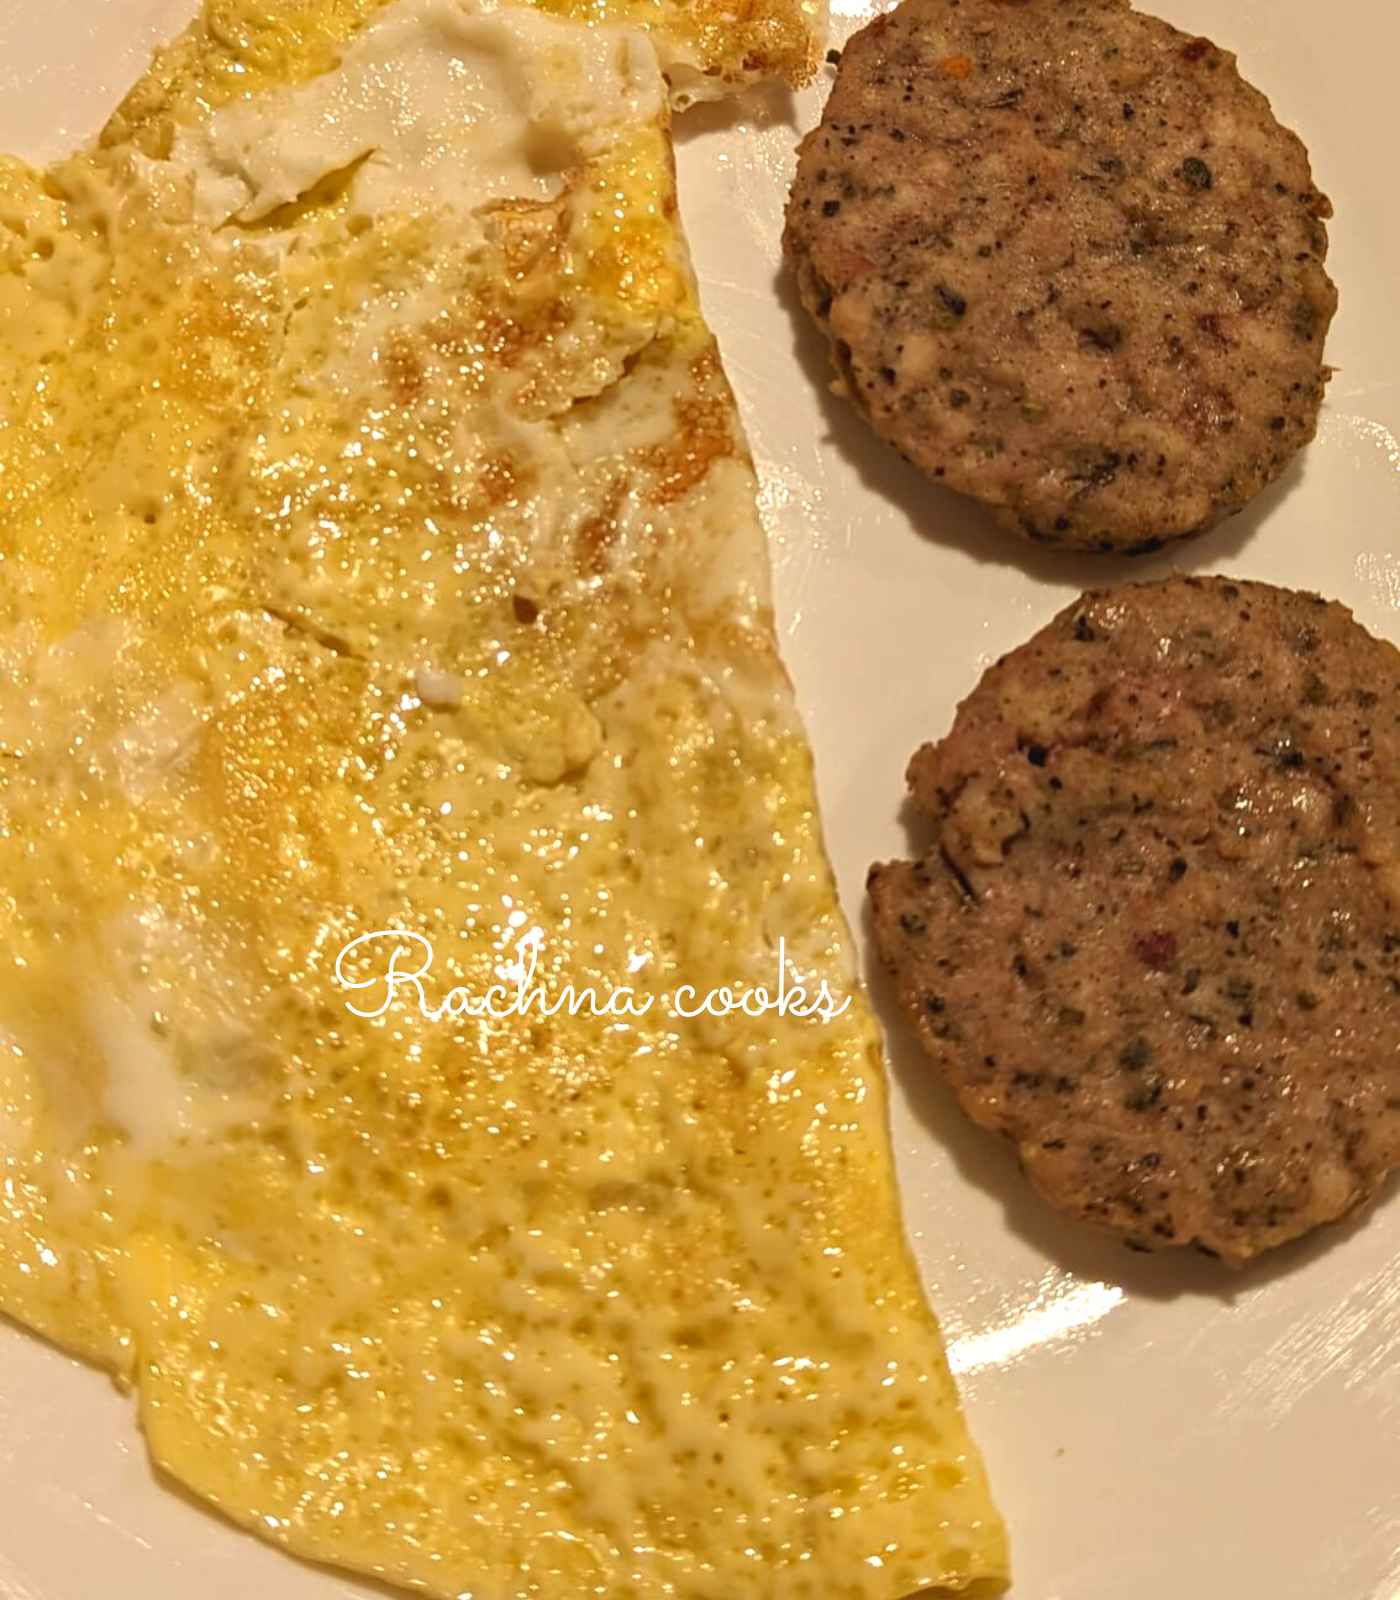 Chicken patties served with omelette